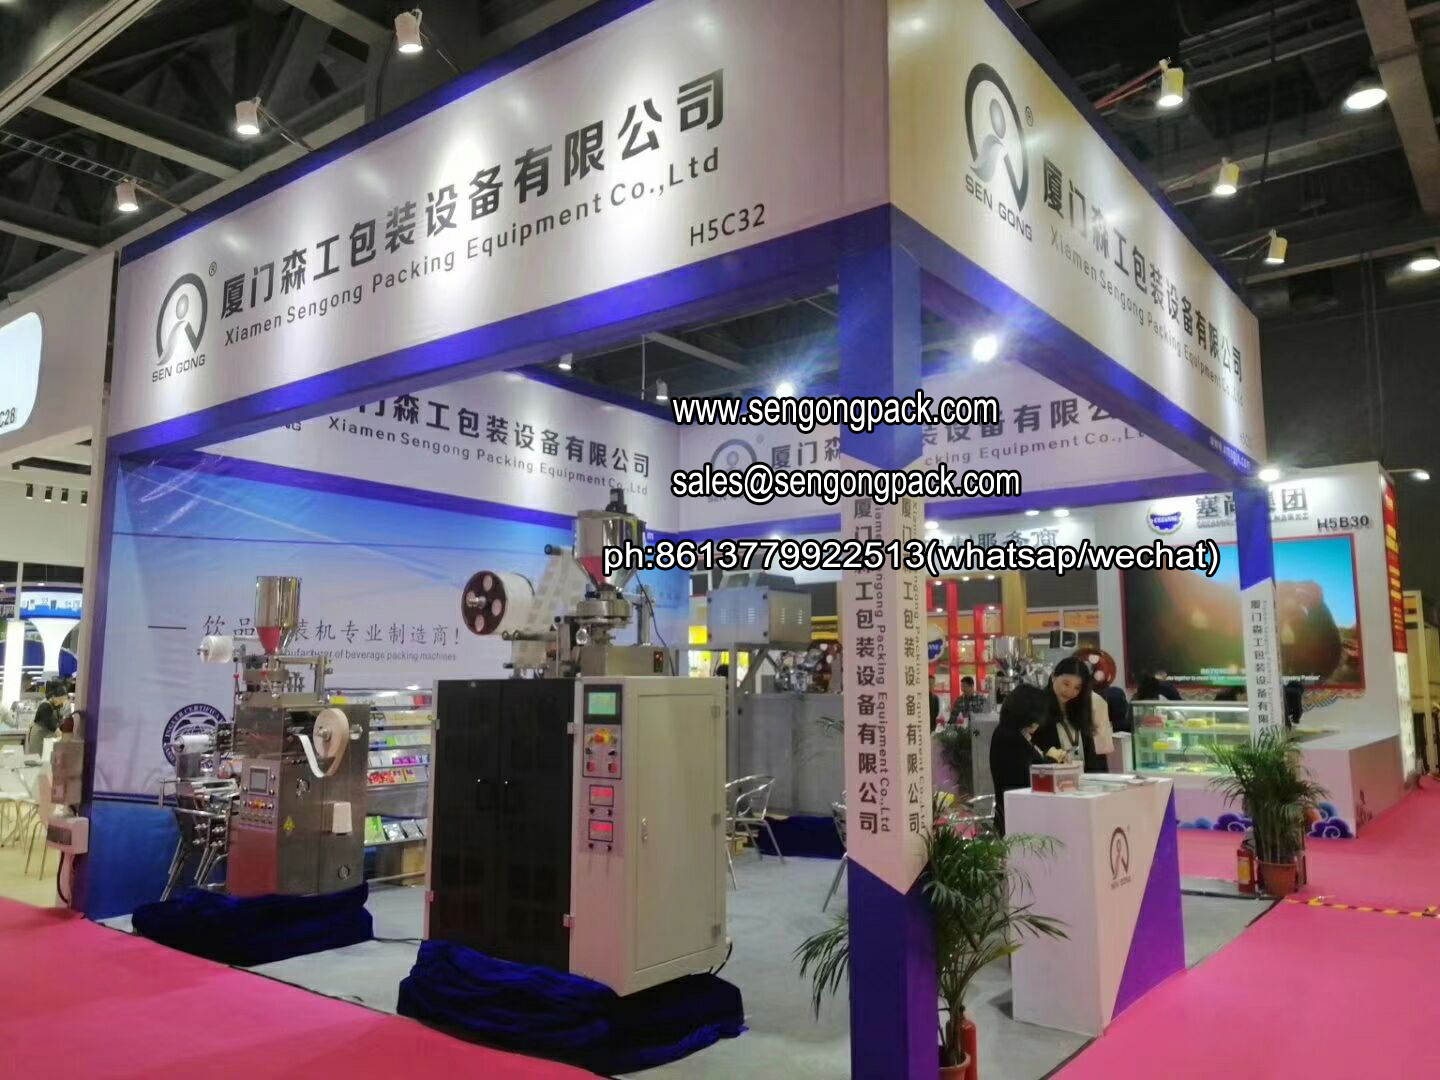 Guangzhou HotelEx From Dec 12th - 14th at Booth H5C32